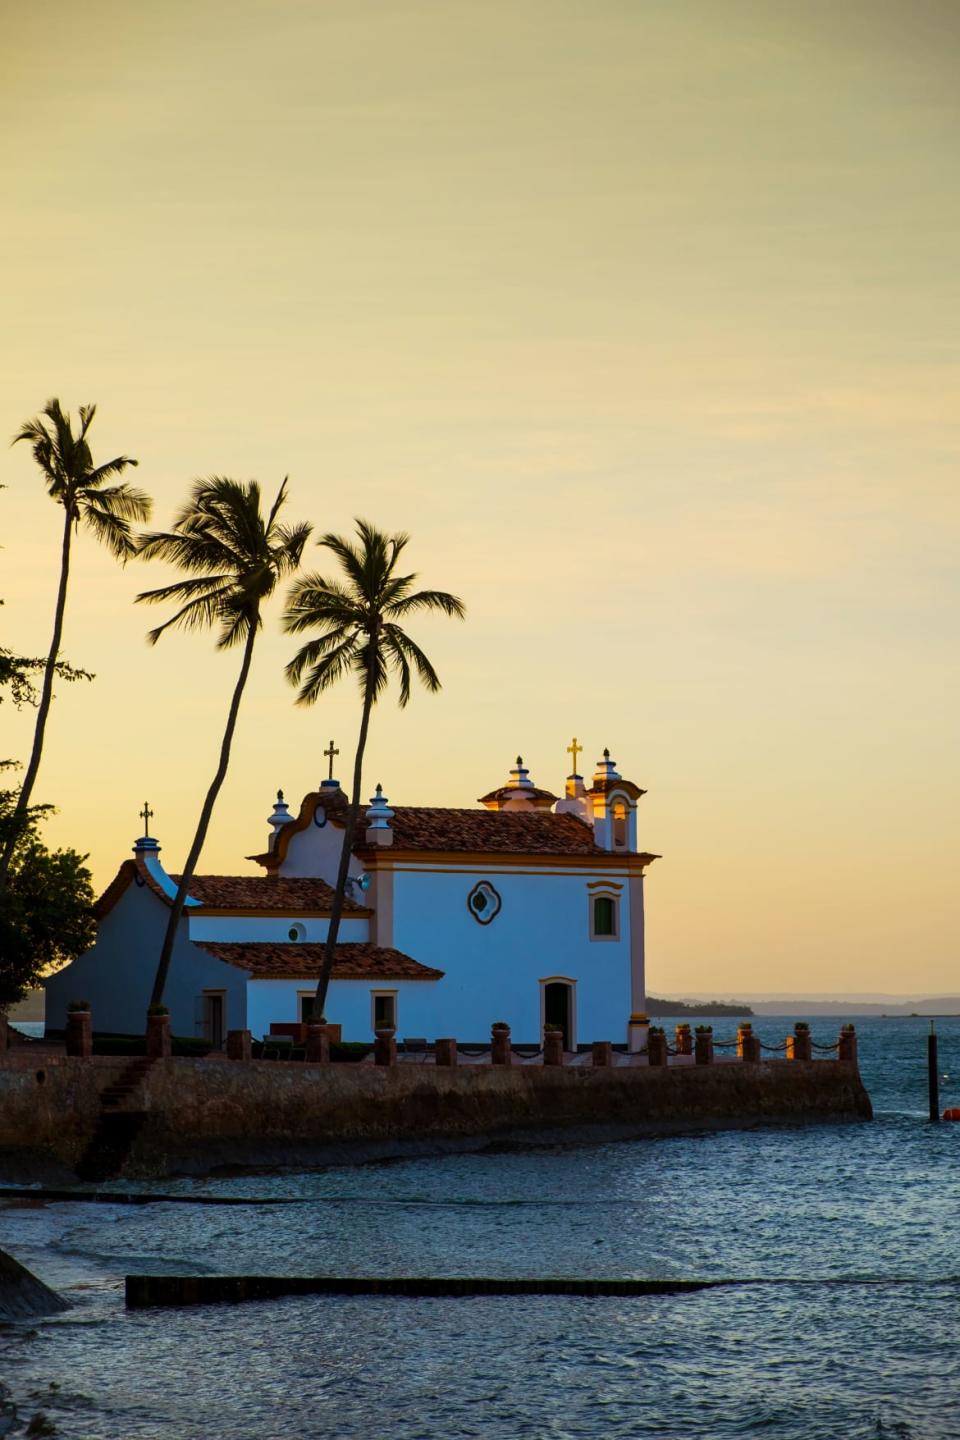 A view of Church of Our Lady of Loreto located on the island of the Frades in the Bay of All Saints in Salvador Bahia Brazil